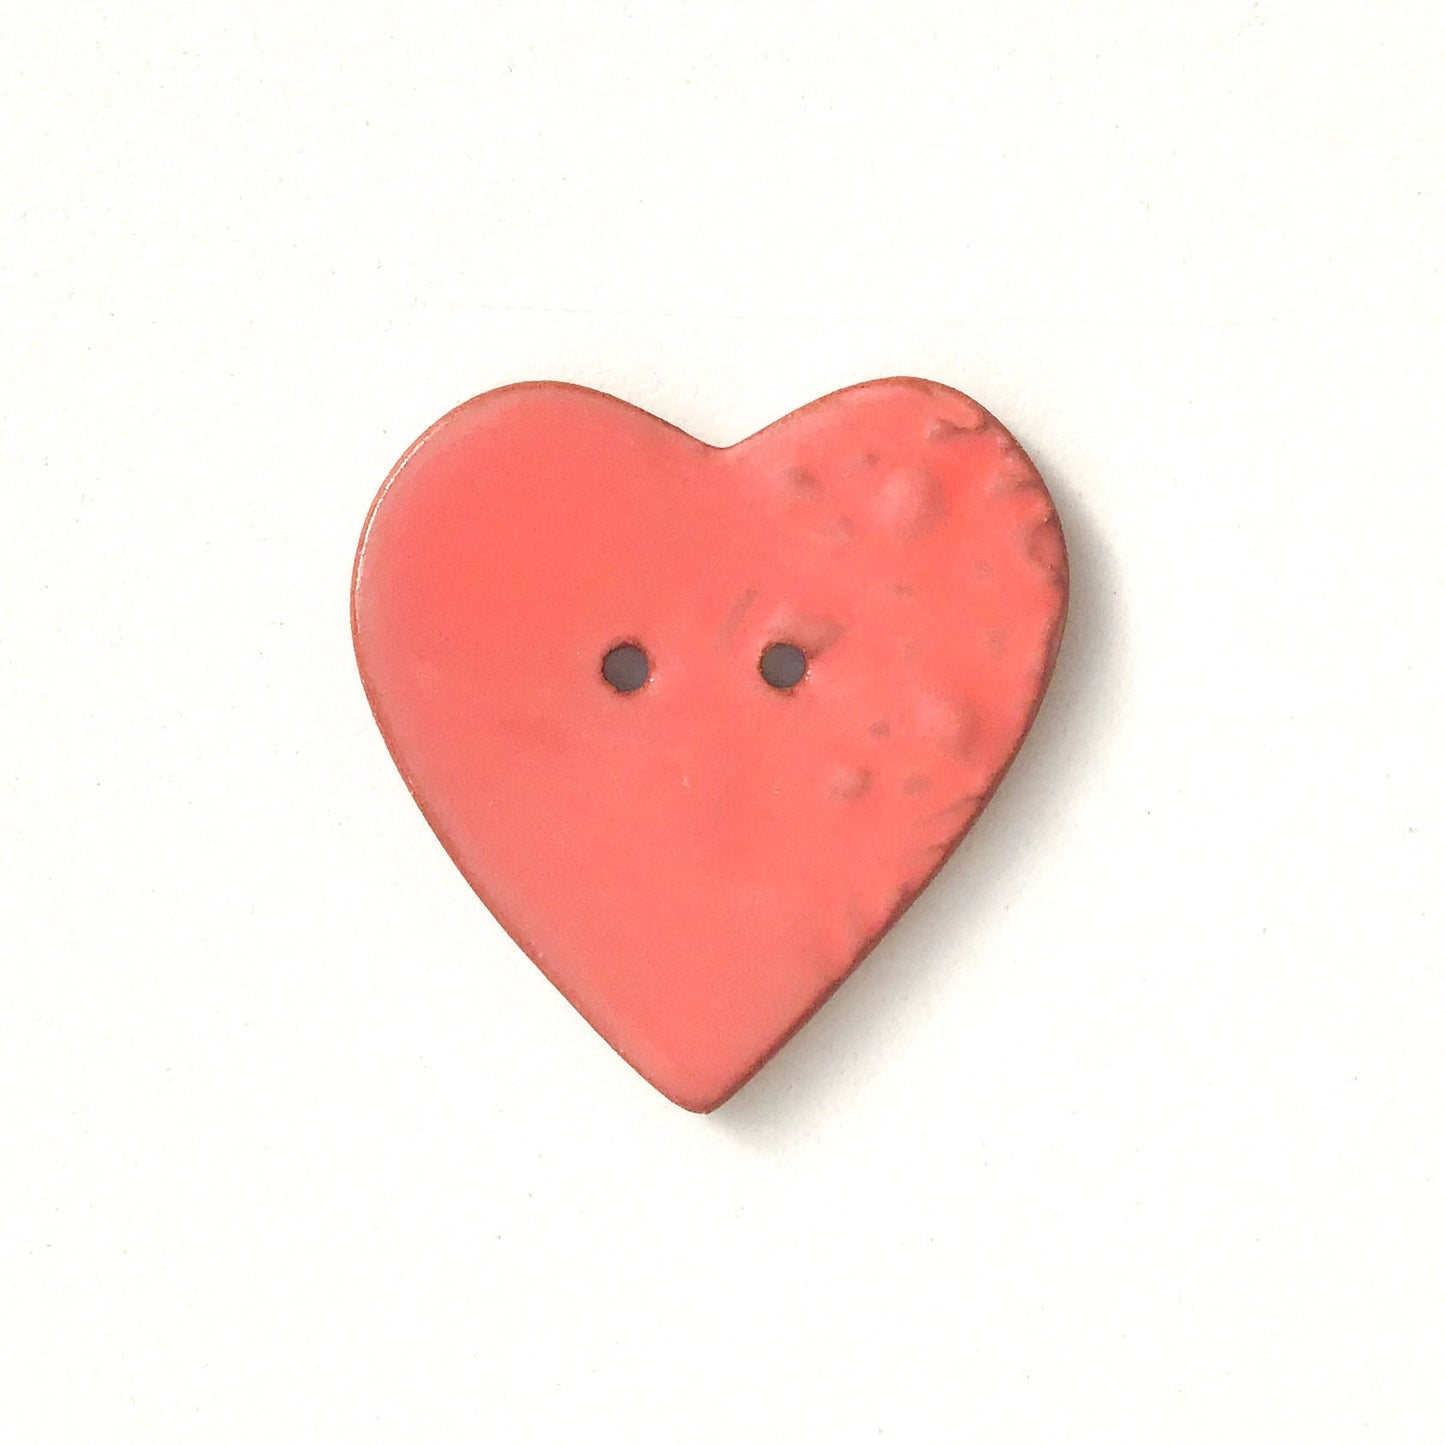 (Wholesale Accounts Only) 1 3/8" Stamped Heart - flat - red clay